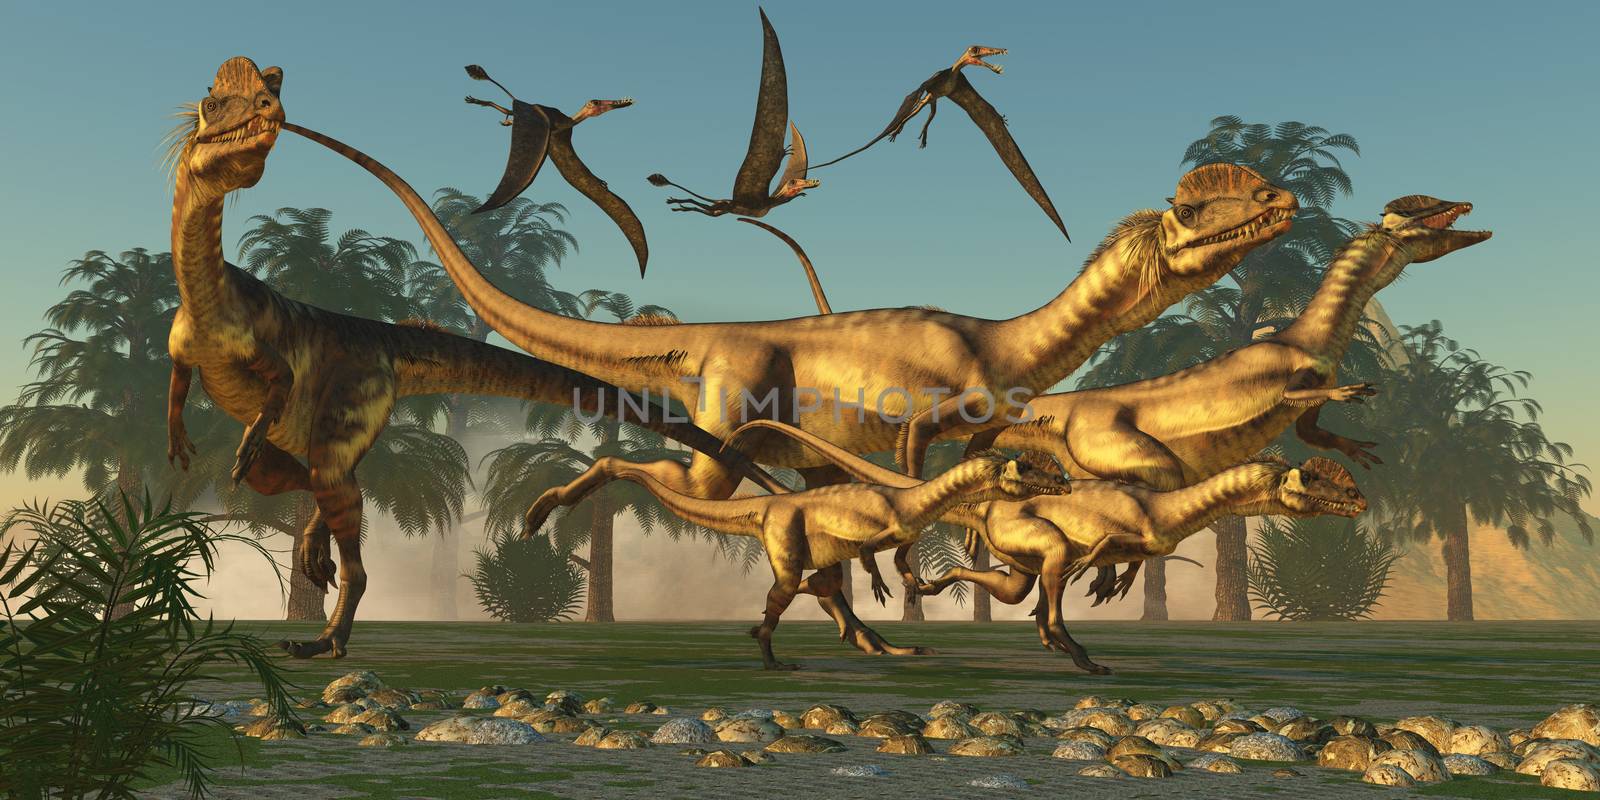 A pack of Dilophosaurus are beginning their hunt for prey as flying Dorygnathus pterosaurs follow along.